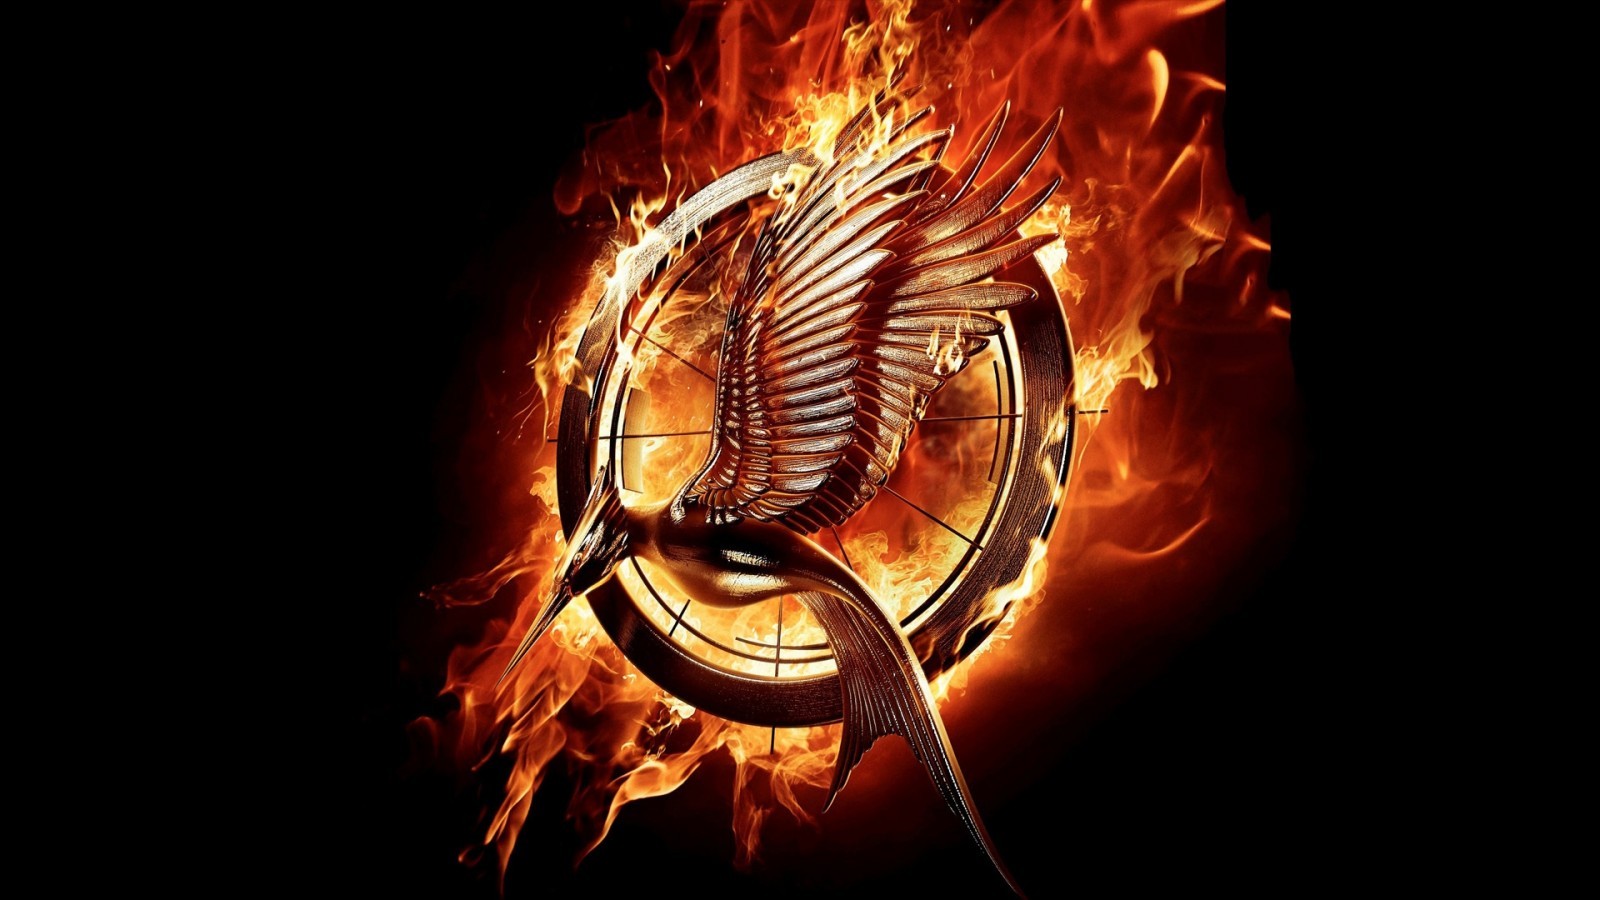 The Hunger Games Catching Fire Soundtrack Download